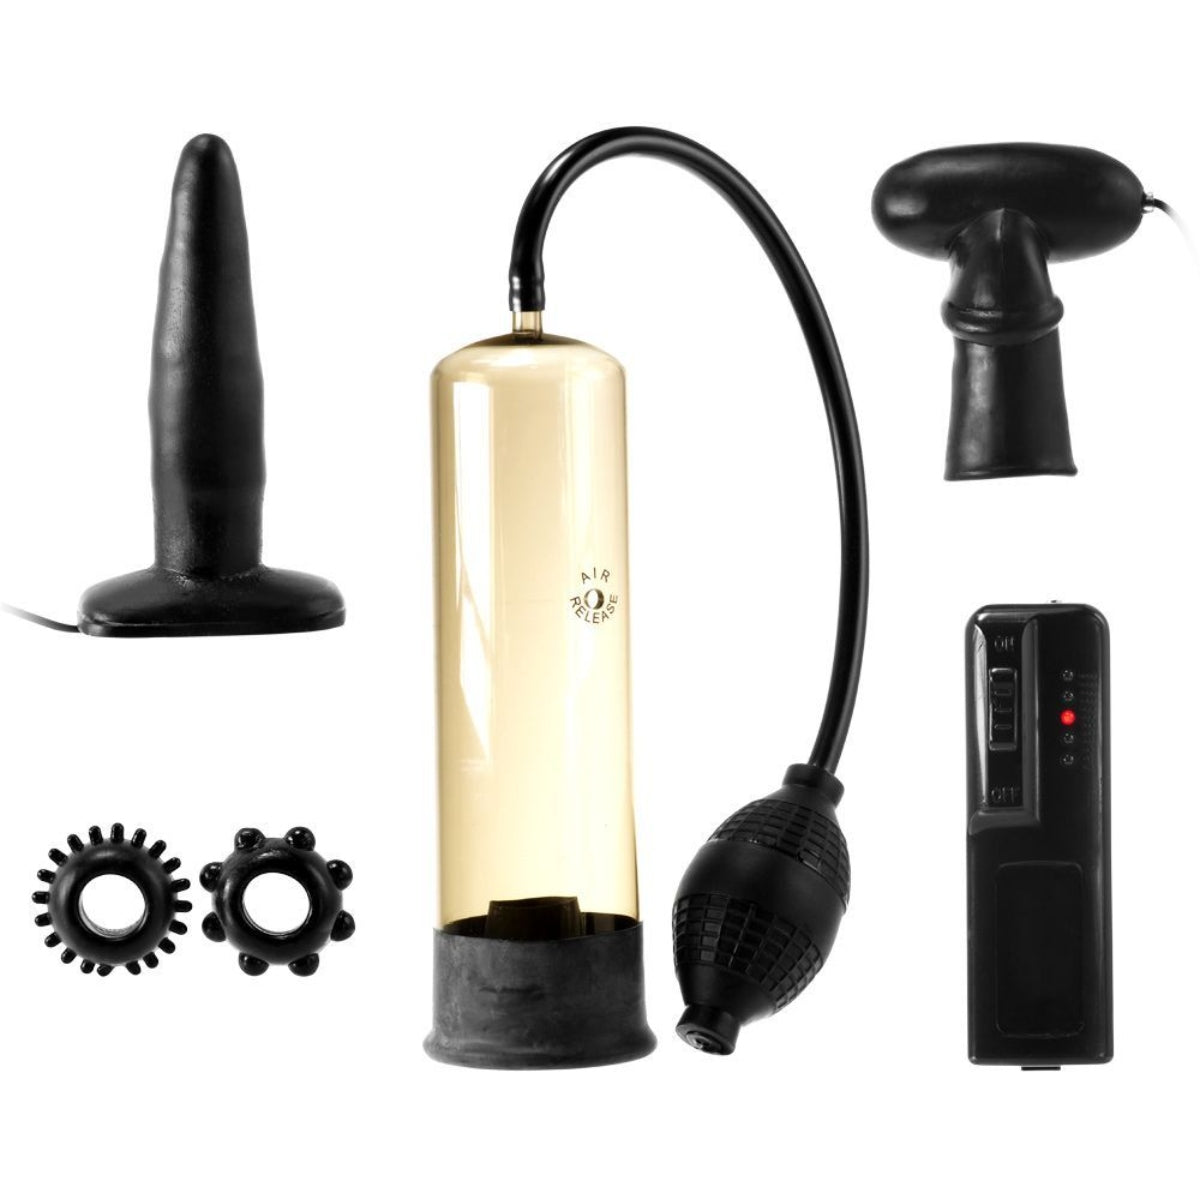 Me You Us Male Collection Couples Sex Toy Kit - Simply Pleasure